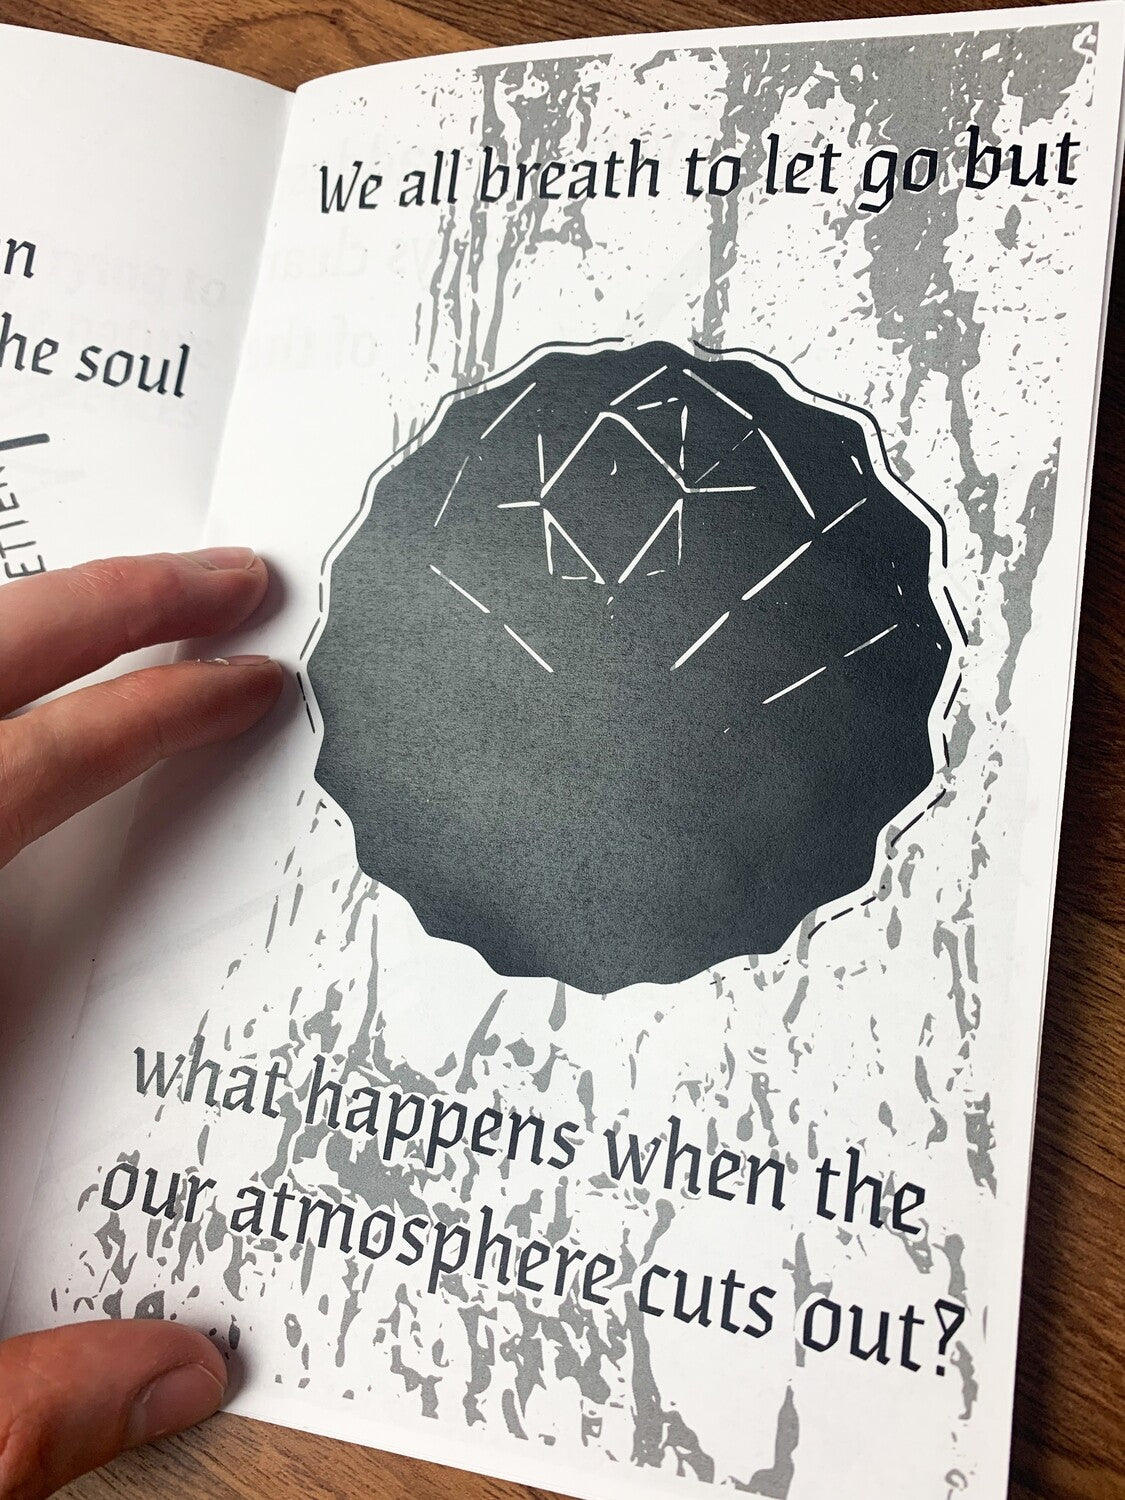 "The Great Exhale" Illustrated Poetry Zine